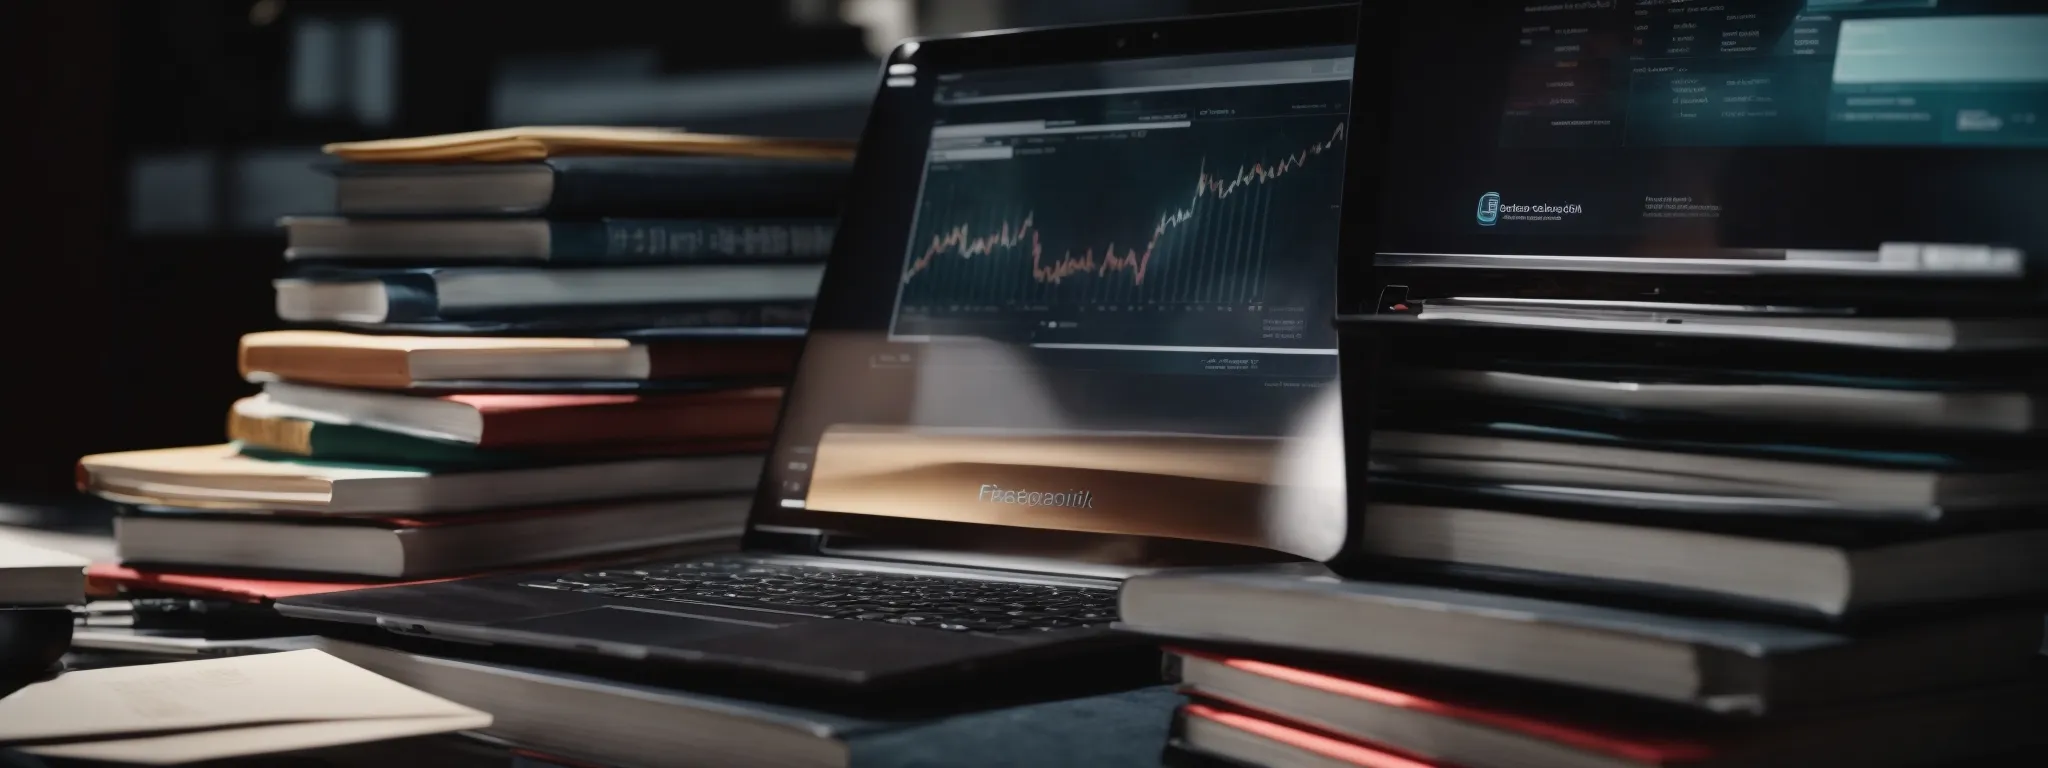 a laptop displaying an analytics dashboard surrounded by stacks of textbooks.